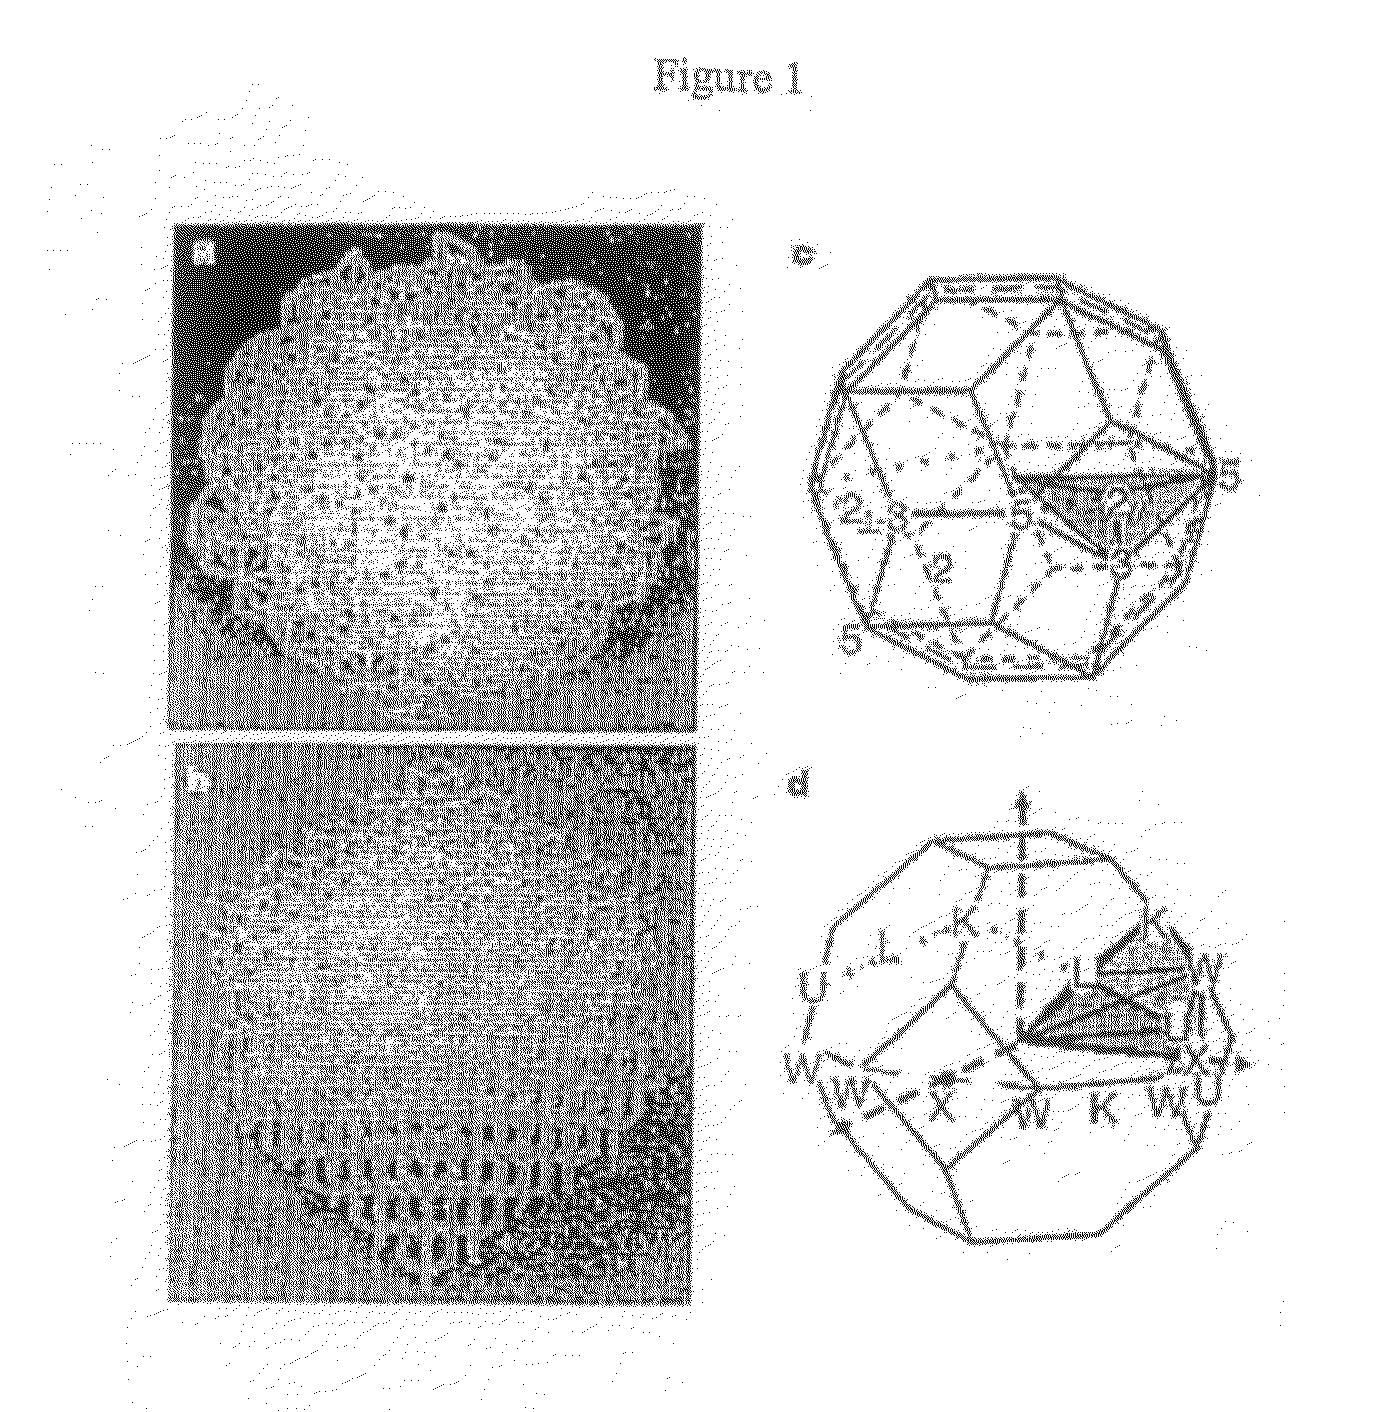 Quasicrystalline structures and uses thereof